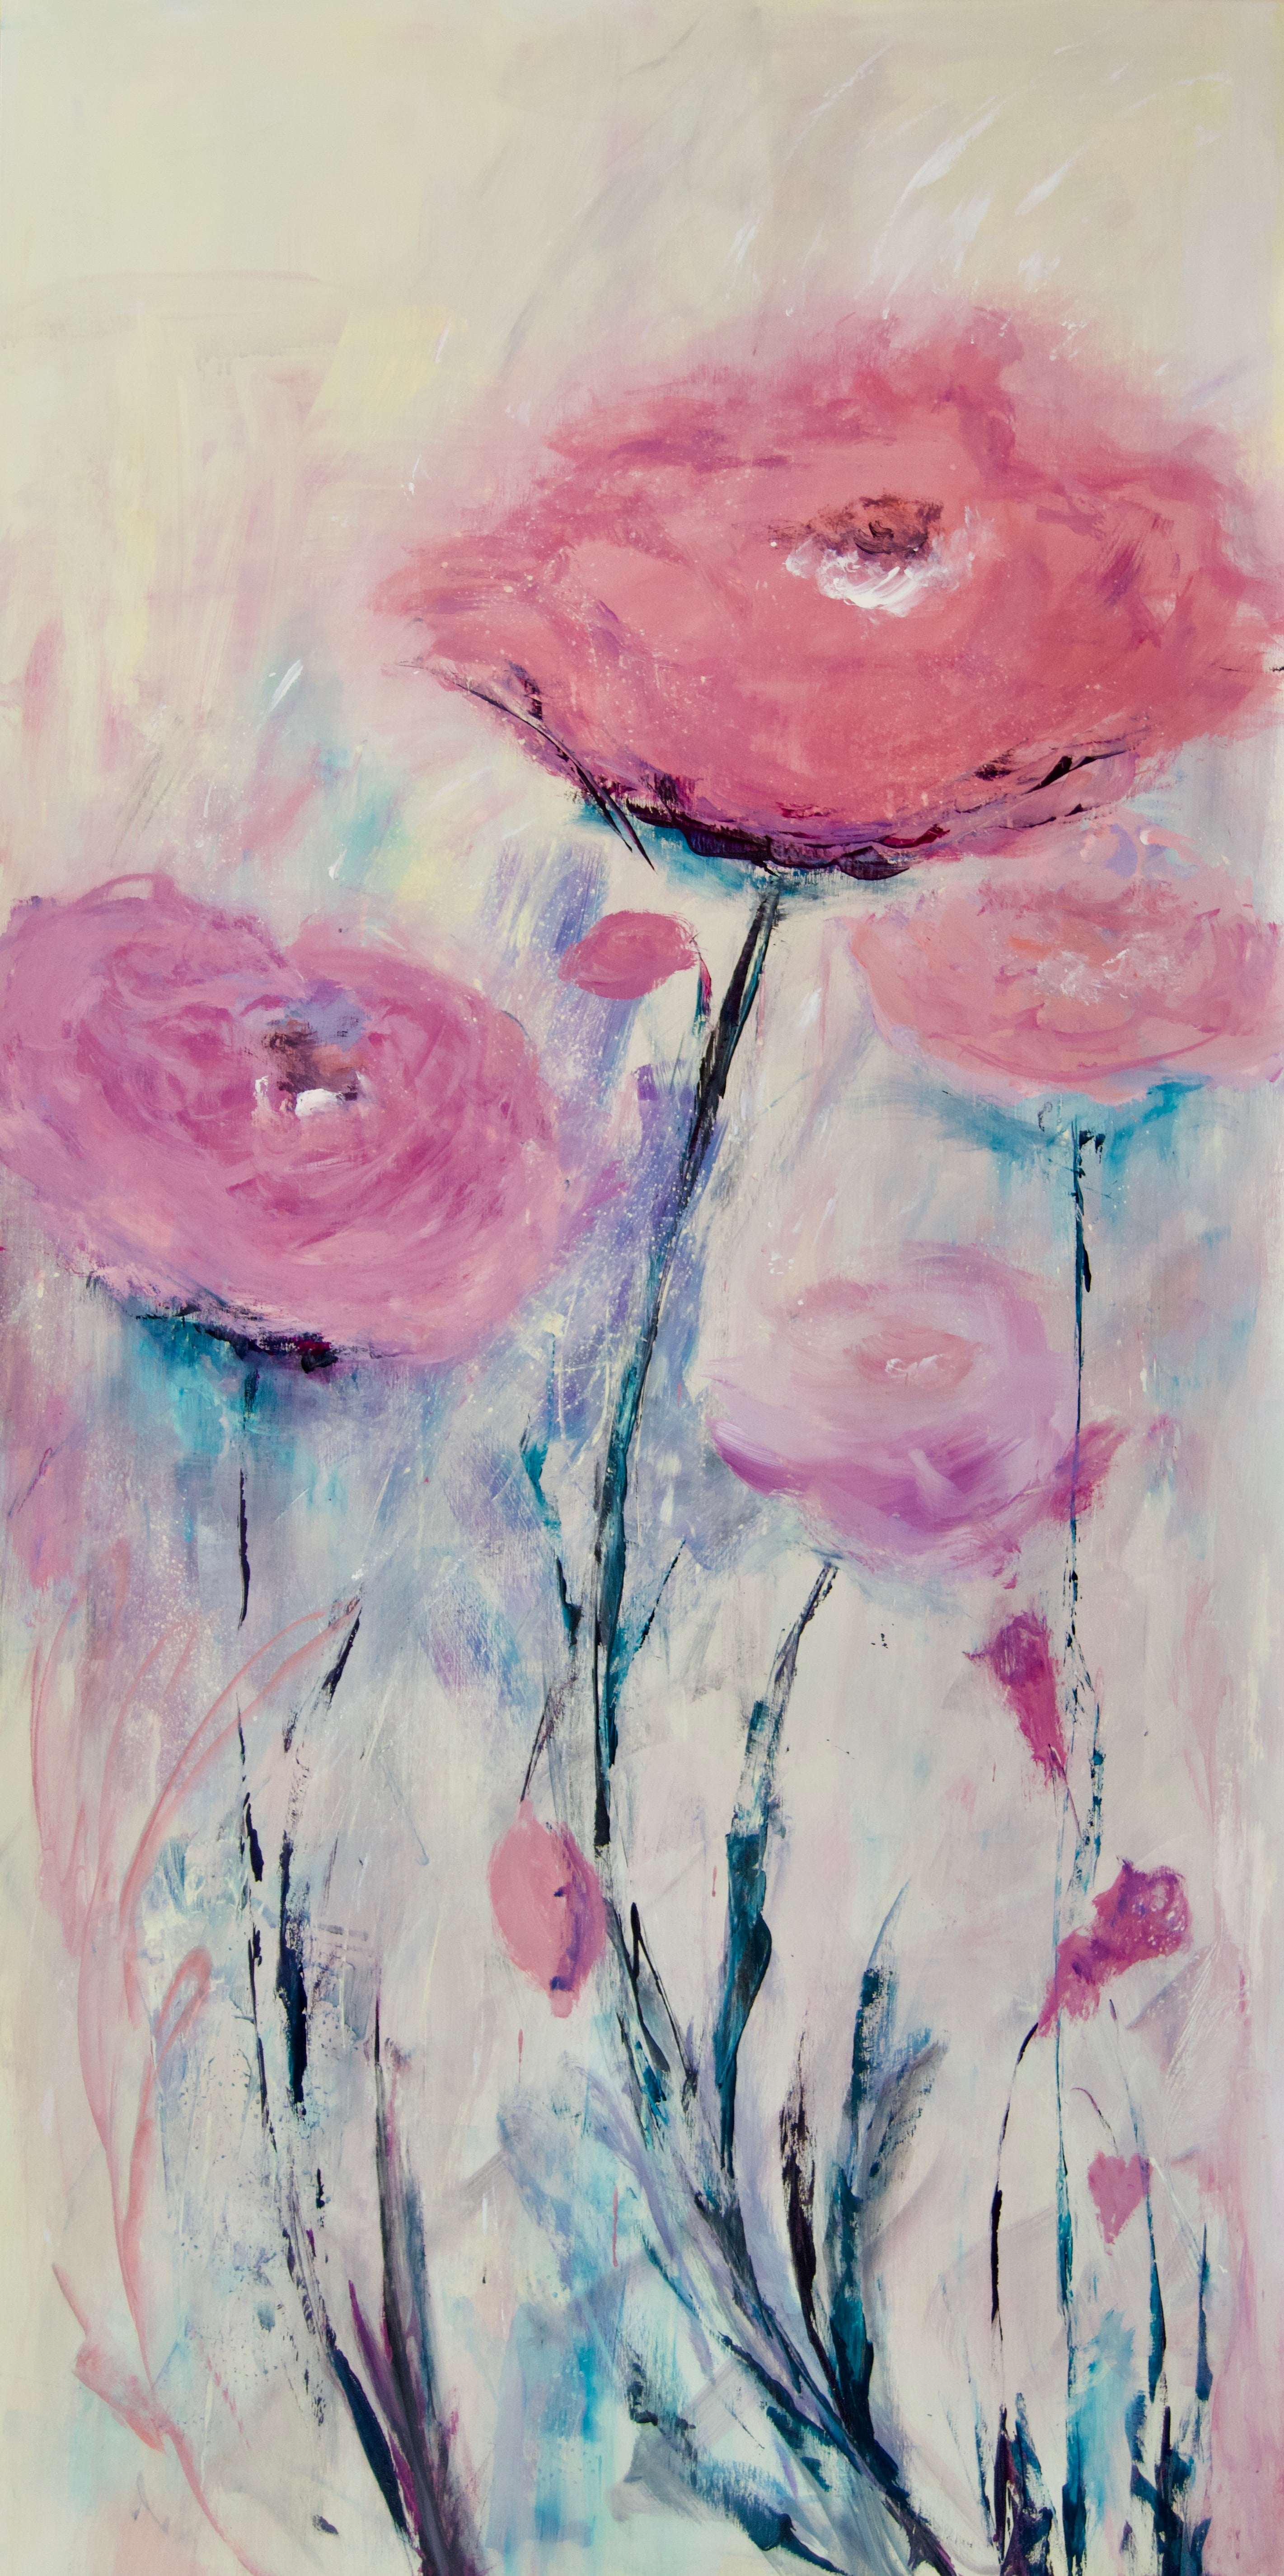 This large original painting of abstract flowers in muted colours of mauves, pinks, and turquoise add a note of sophistication while still being playful. Would be lovely in most principal rooms. IncludesCustom White Floating Frame, bumper pads and pre-mounted wires. Free shipping in N.A. No tax! 